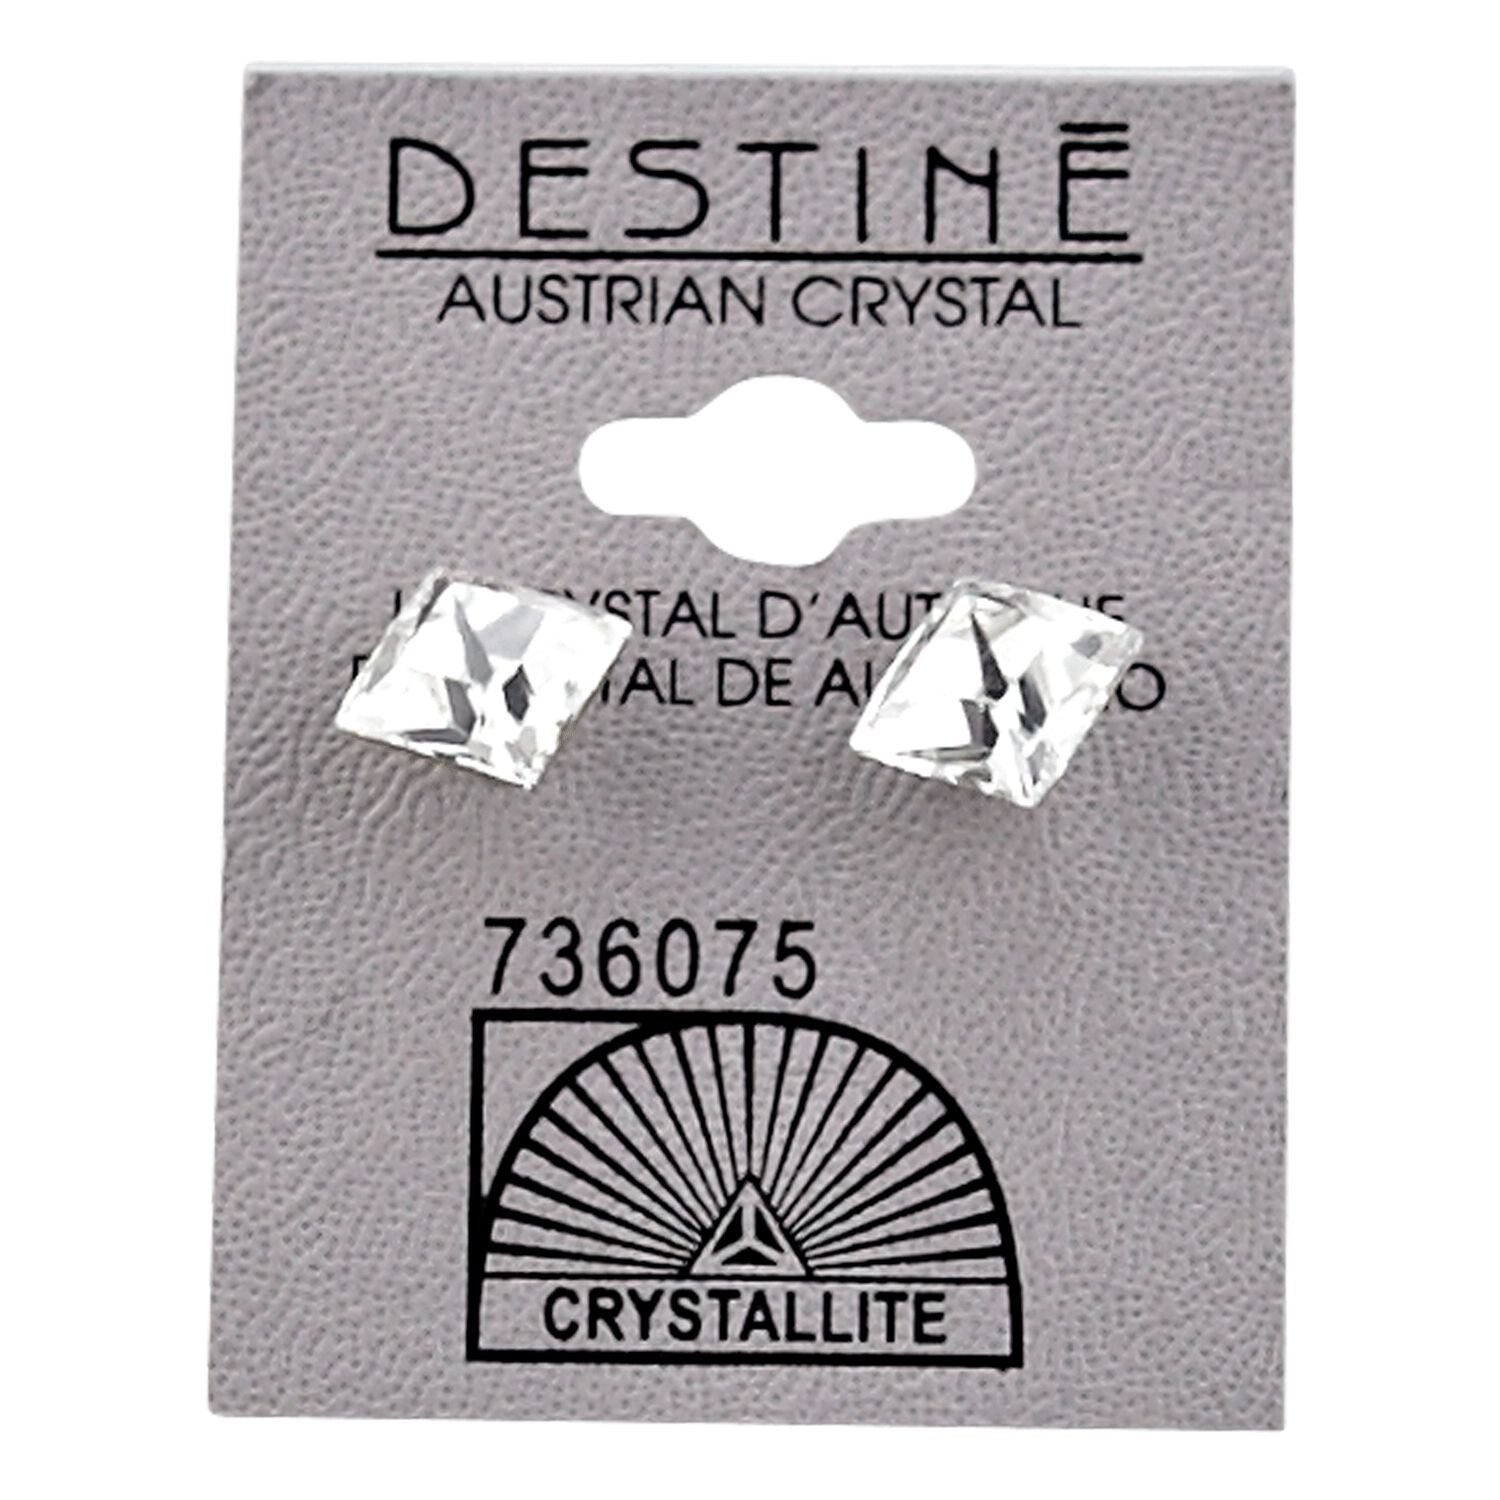 Crystallite Destine Clear Faceted Square Earrings